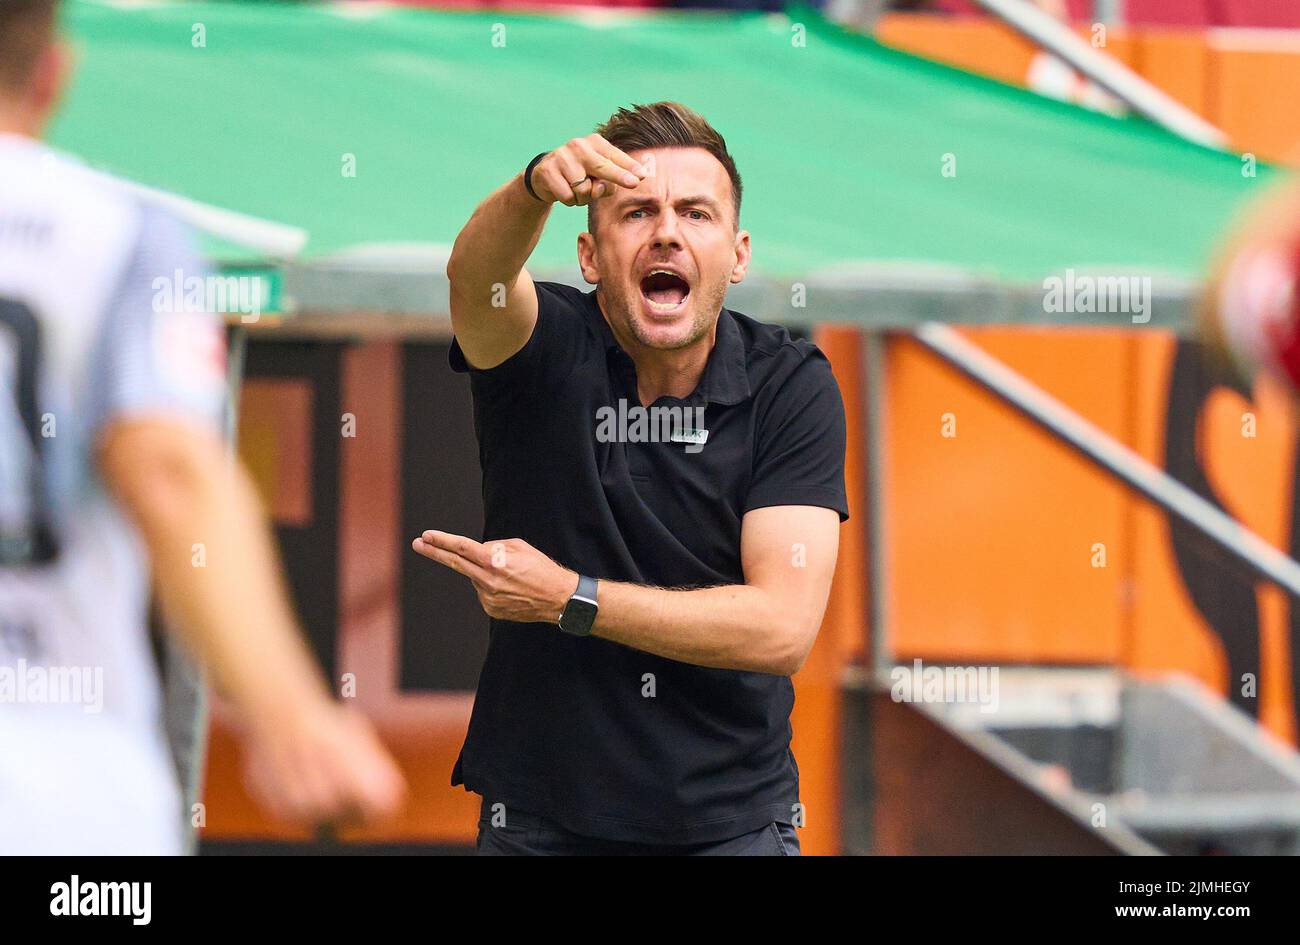 Enrico Maassen, FCA coach,  team manager, geste in the match FC AUGSBURG - SC FREIBURG 1.German Football League on Aug 06, 2022 in Augsburg, Germany. Season 2022/2023, matchday 1, 1.Bundesliga, FCB, Munich, 1.Spieltag © Peter Schatz / Alamy Live News    - DFL REGULATIONS PROHIBIT ANY USE OF PHOTOGRAPHS as IMAGE SEQUENCES and/or QUASI-VIDEO - Stock Photo